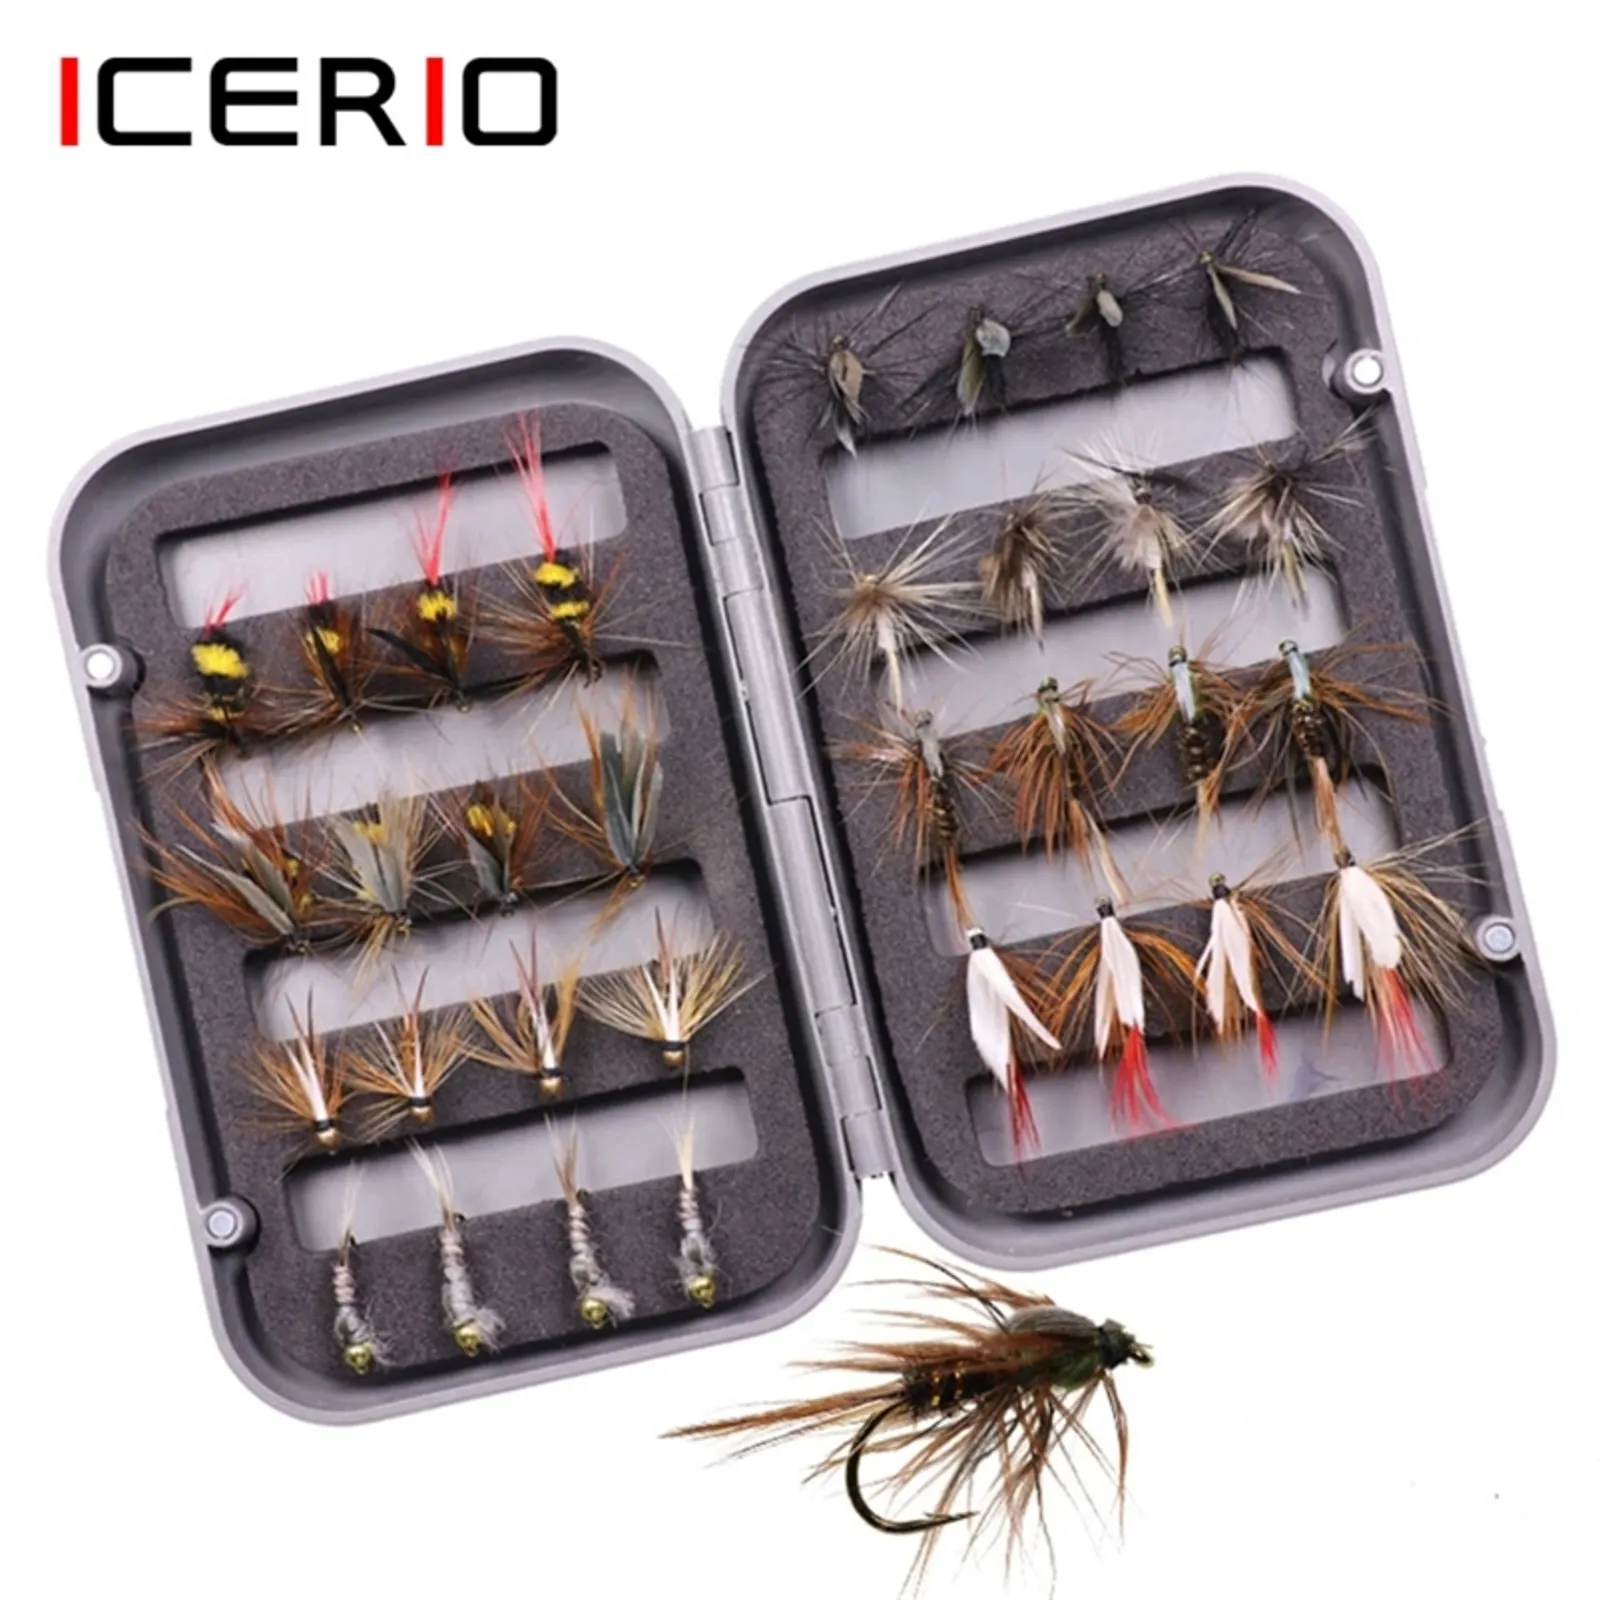 ICERIO Assorted Fly Fishing Kit With Nymph Dry/Wet Flies Trout Lure Rattle  Bait From Niao009, $11.16